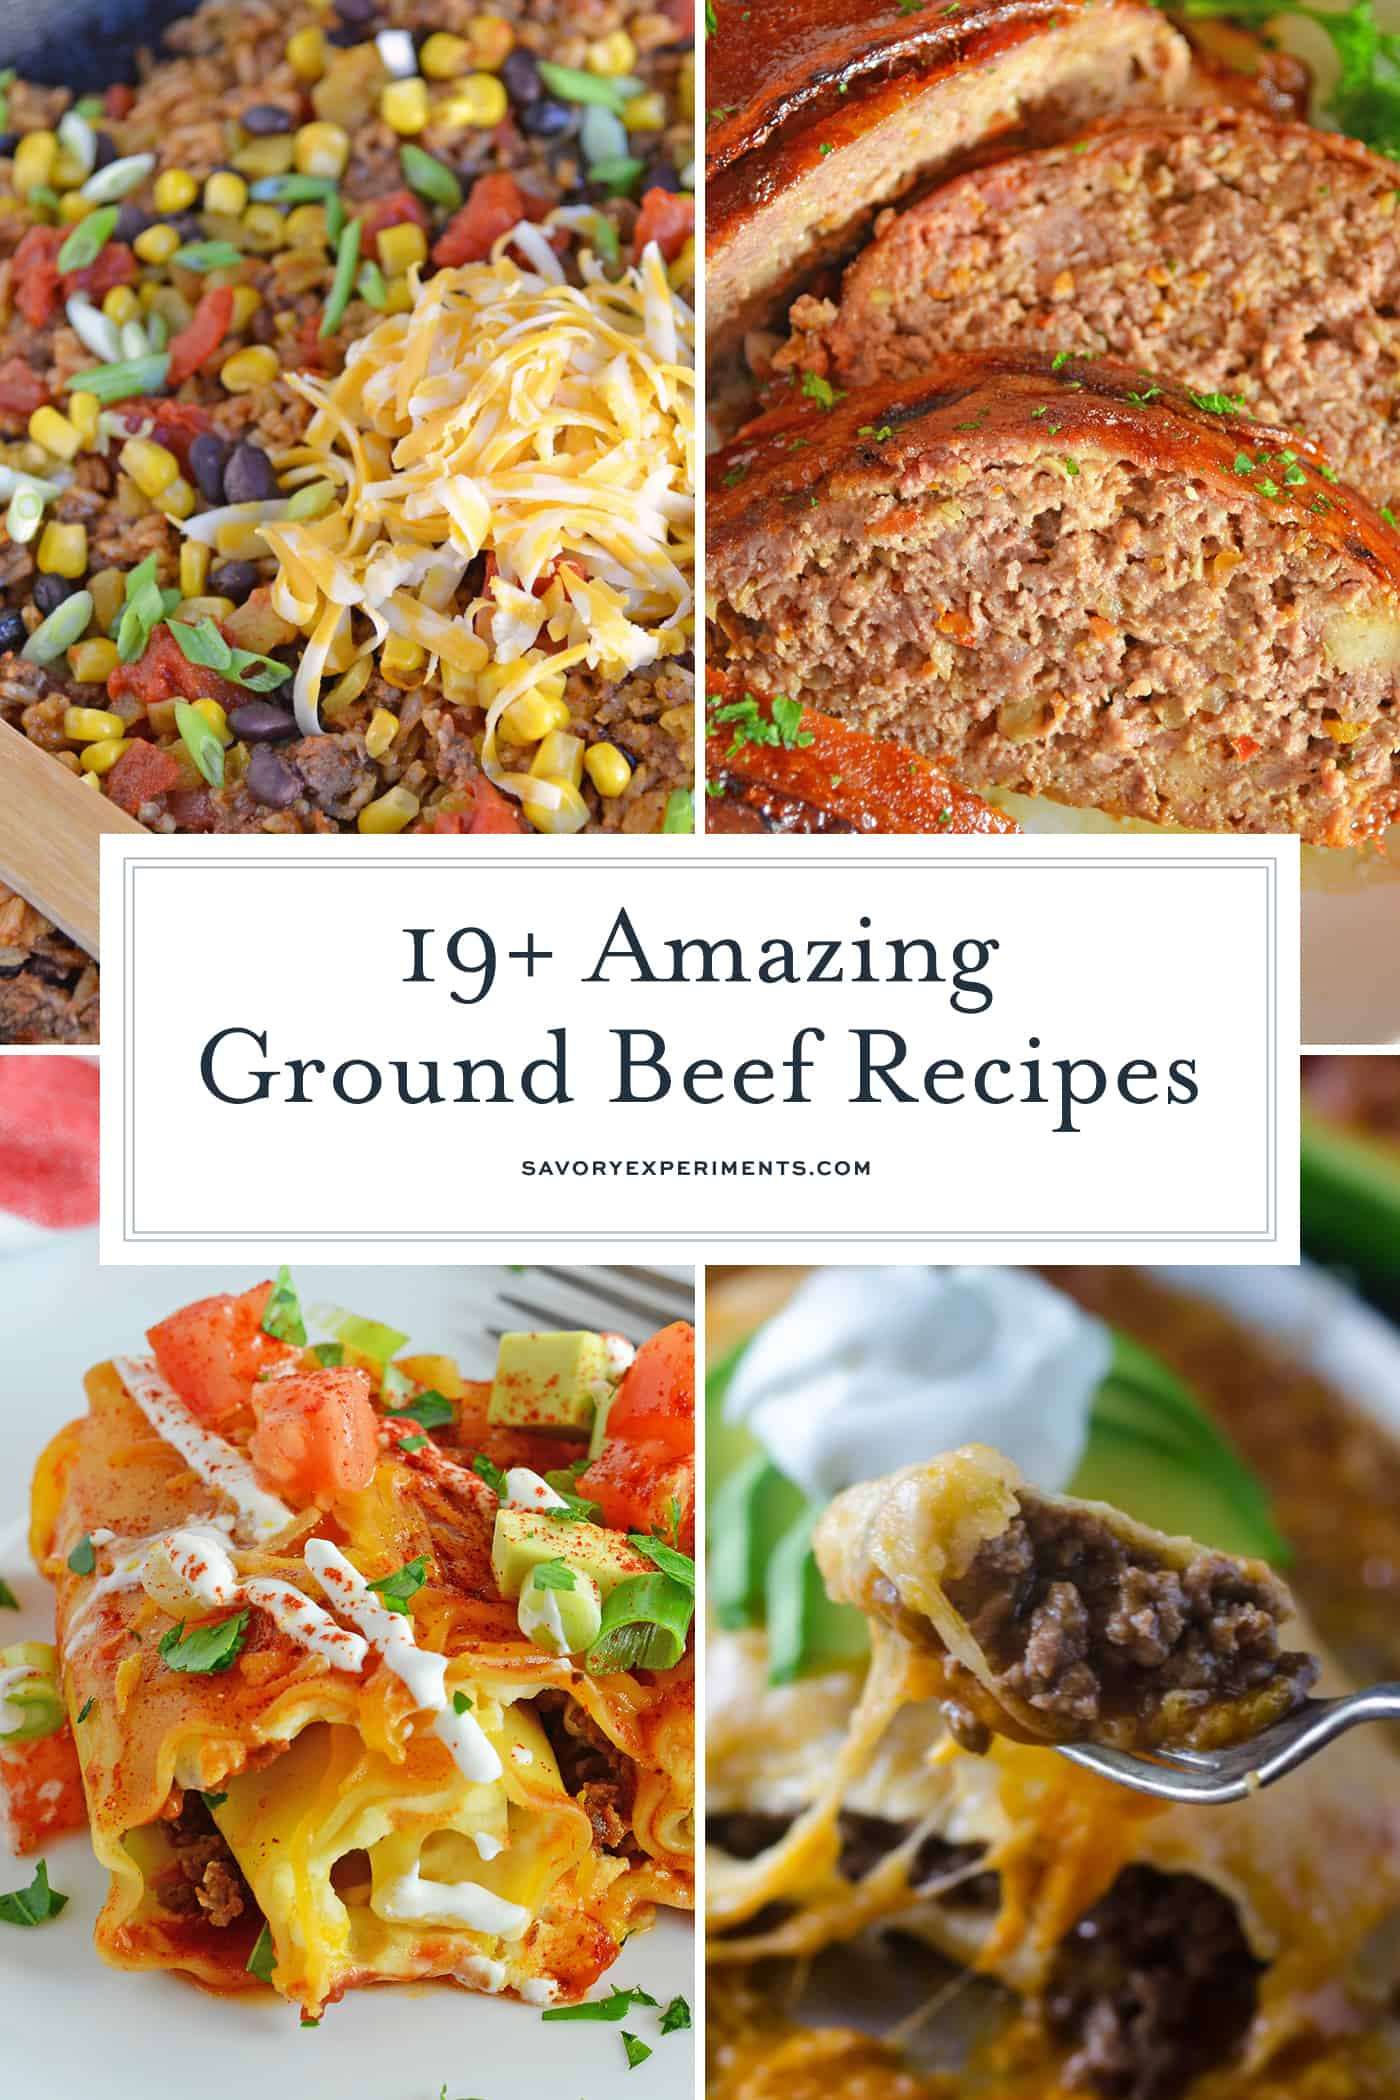 21 Ideas for Recipes Using Ground Beef - Best Recipes Ideas and Collections